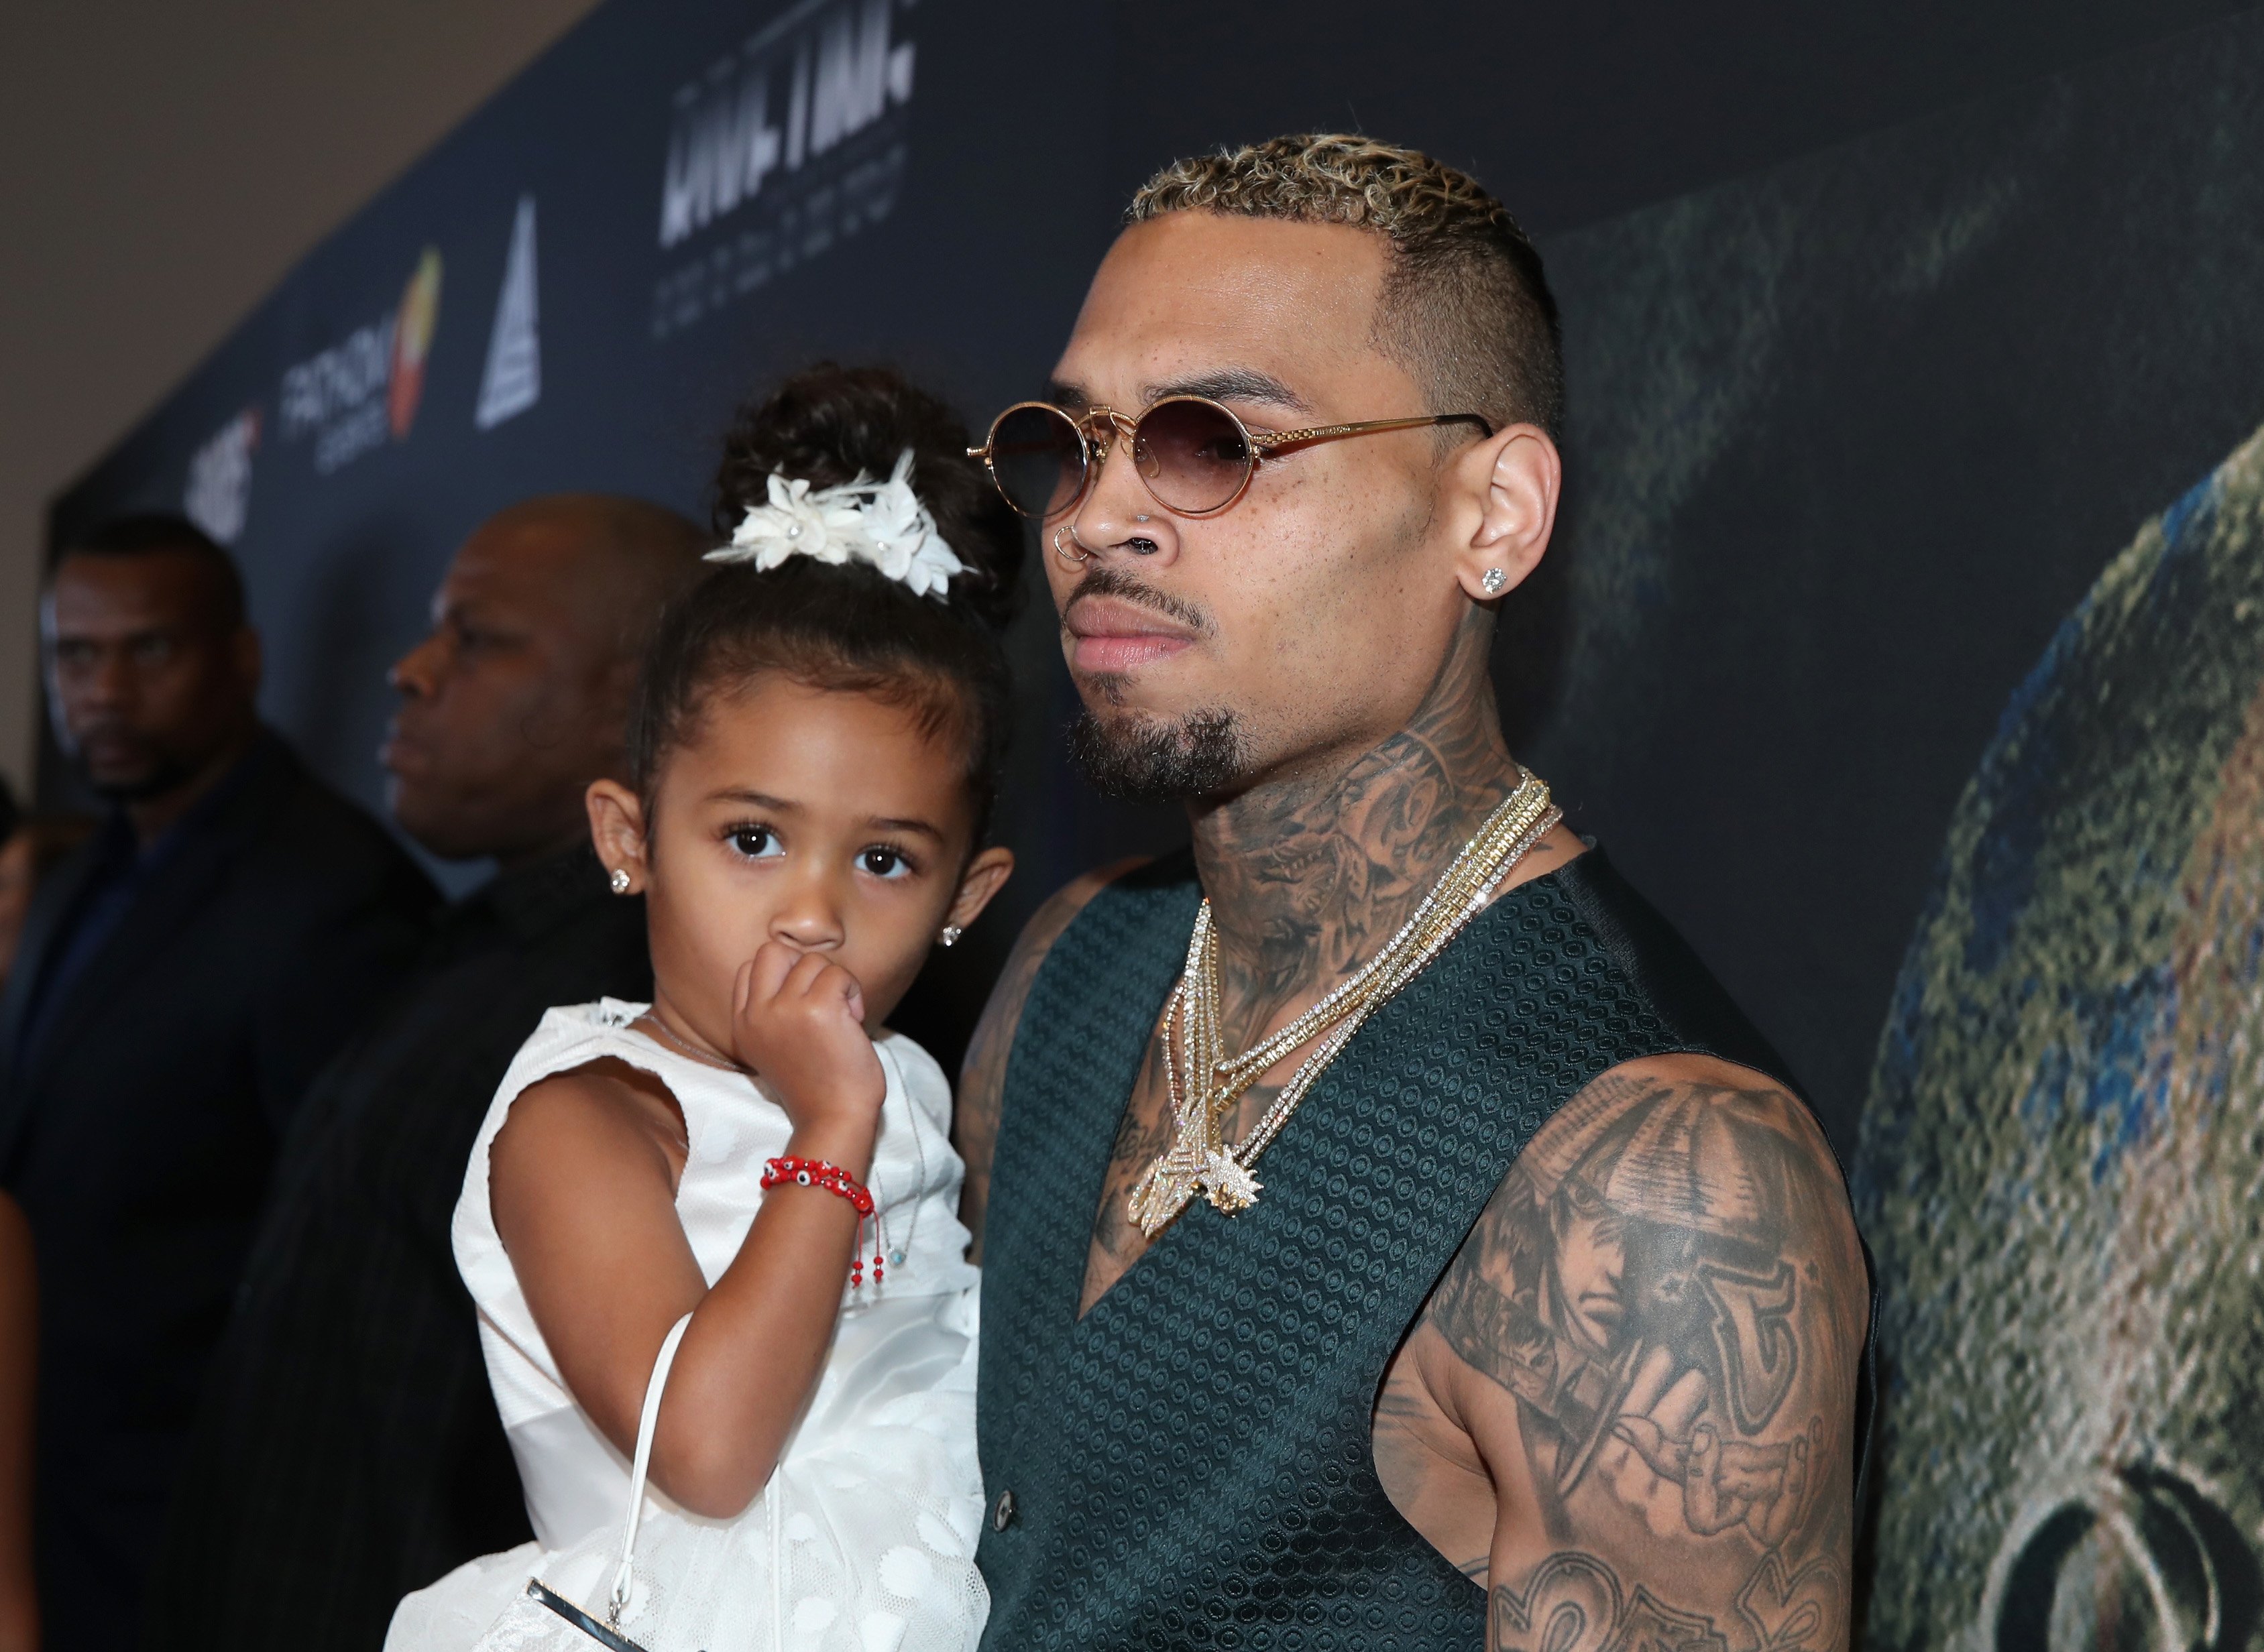 Chris Brown and Royalty Brown at the premiere of "Chris Brown: Welcome To My Life" at L.A. LIVE on June 6, 2017 in Los Angeles, California. | Photo: Getty Images